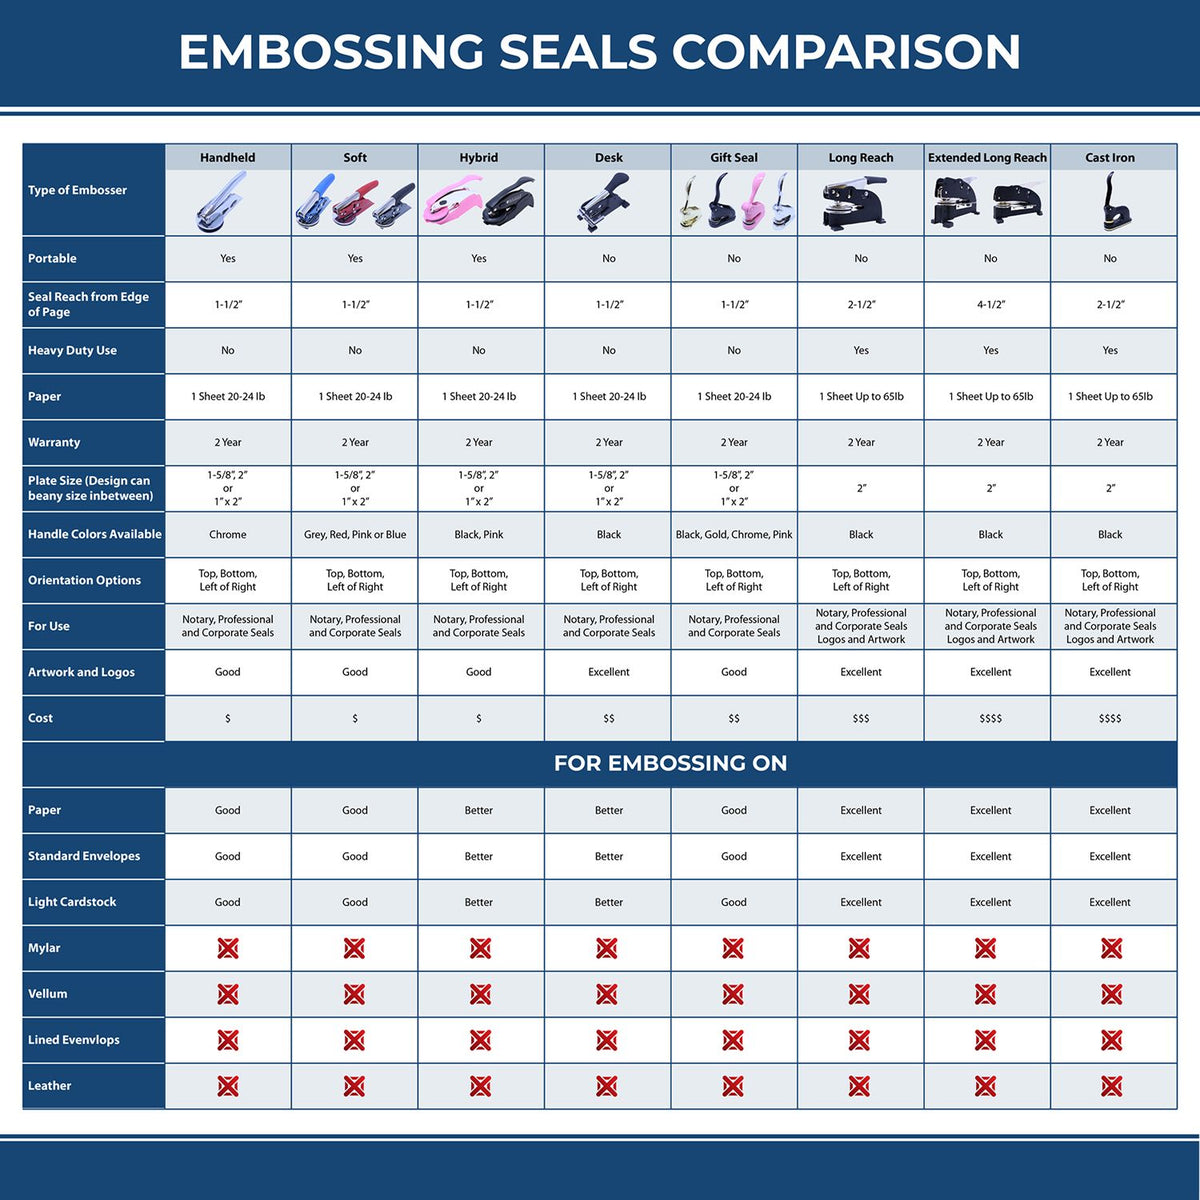 A comparison chart for the different types of mount models available for the Handheld Idaho Architect Seal Embosser.